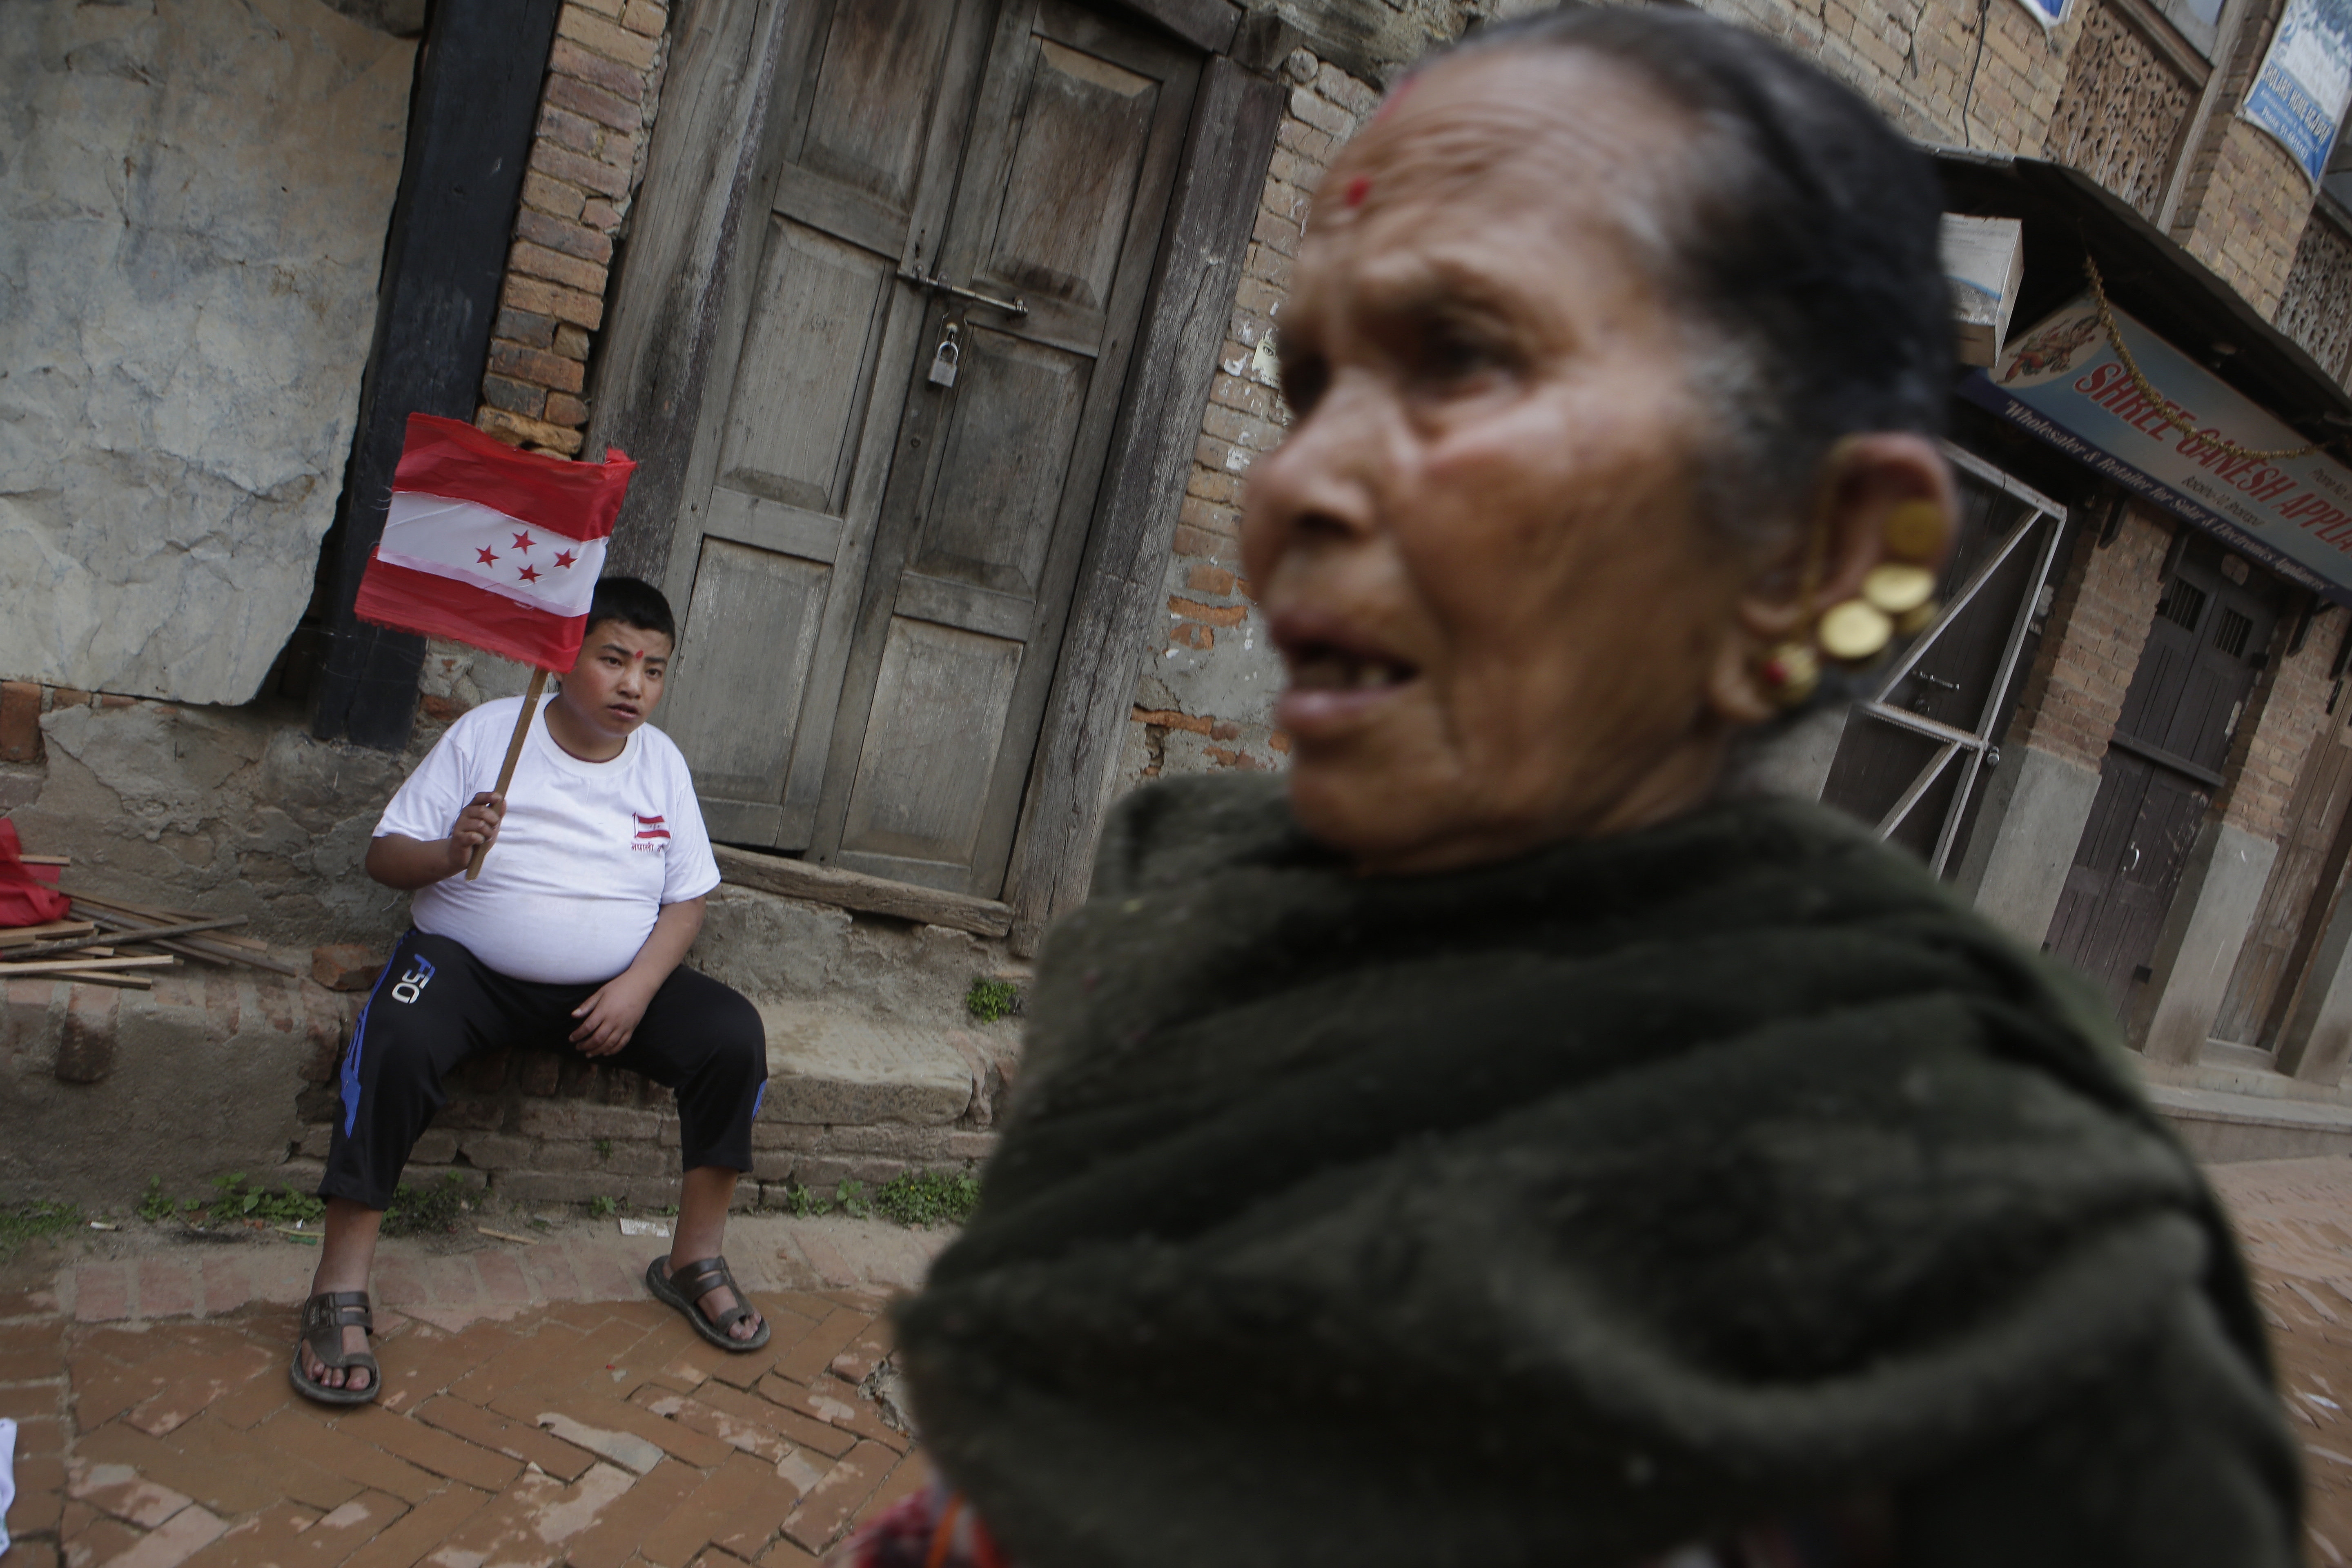 In this May 11, 2017 photo, a Nepalese teenager holds the Nepali Congress party flag in Bhaktapur, Nepal. Much has changed since Nepal last held local elections 20 years ago _ the Himalayan country's 240-year monarchy was abolished, federal democracy was introduced and political wrangling took center stage. Earthquakes ravaged the country. A Maoist insurgency left thousands dead. And widespread poverty ensured daily life for many remained a struggle if not a misery. Through it all, Nepal's 29 million citizens have had only government-appointed bureaucrats to look to for answers or help with settling local disputes. Many voters said they were excited for the chance this weekend to choose local representatives for the first time since 1997.(AP Photo/Niranjan Shrestha)